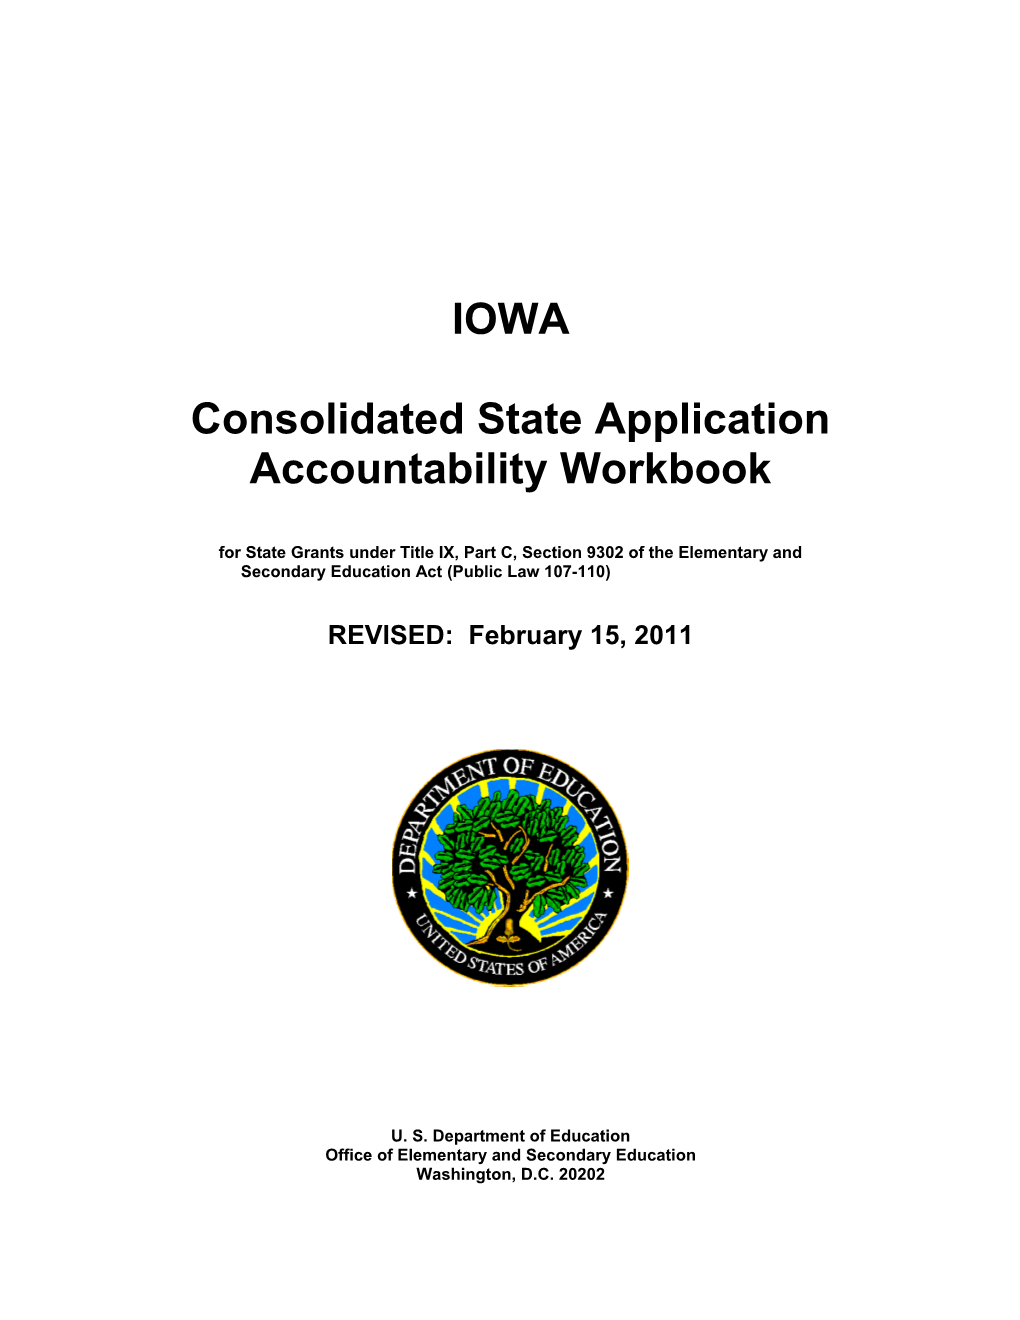 Iowa Consolidated State Application Accountability Workbook REVISED July 15, 2011 (MS Word)